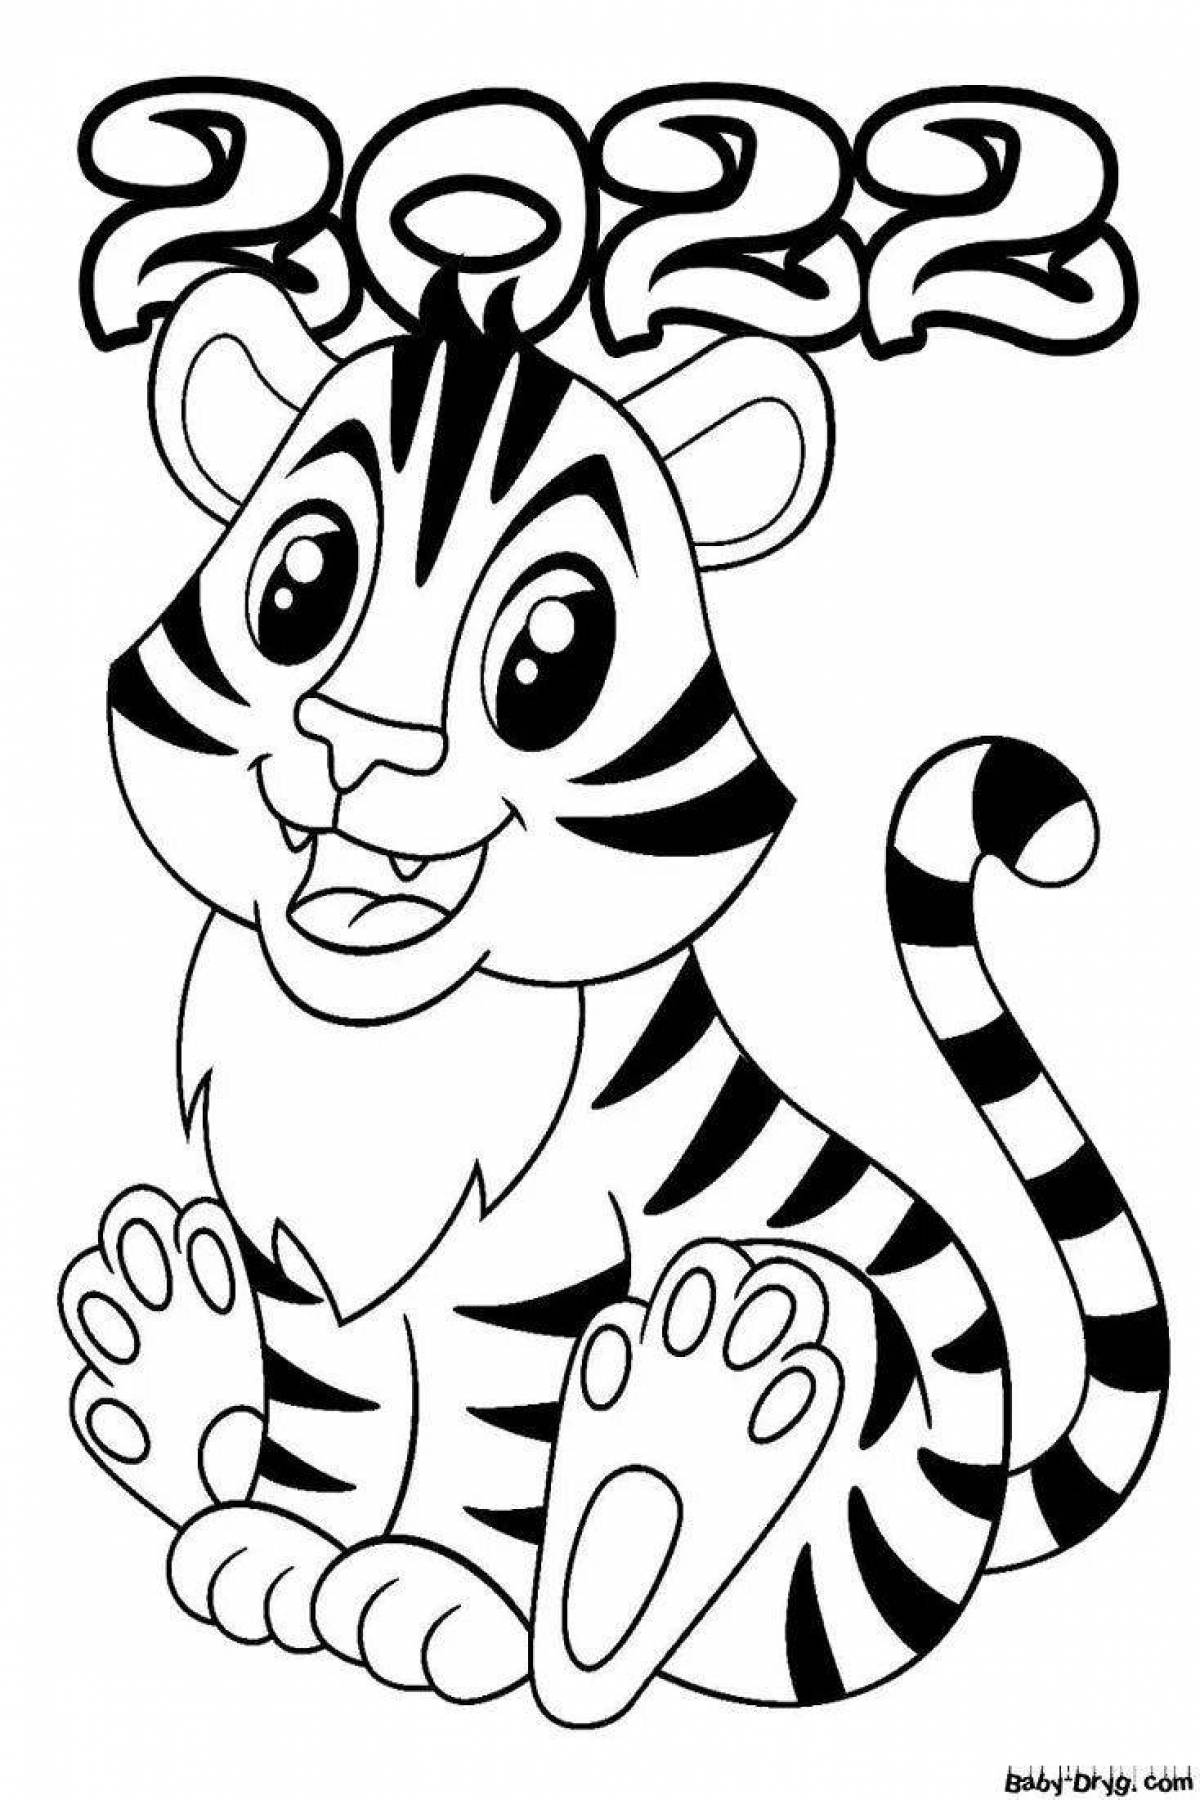 Awesome tiger coloring page